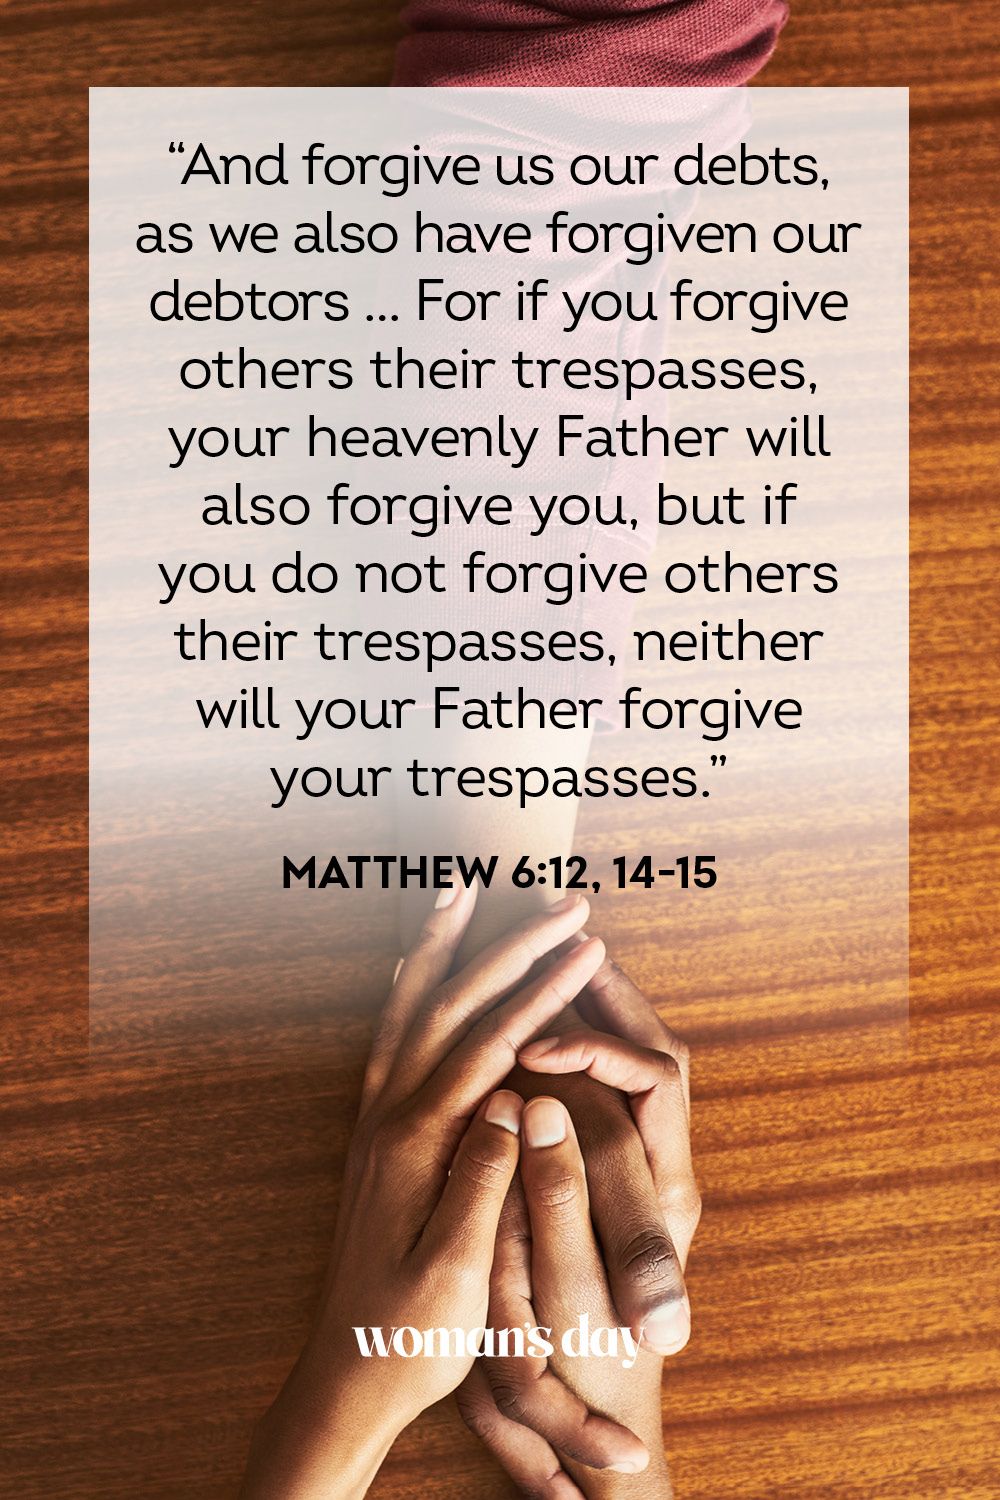 17 Bible Verses About Forgiveness Examples Of Forgiveness In The Bible